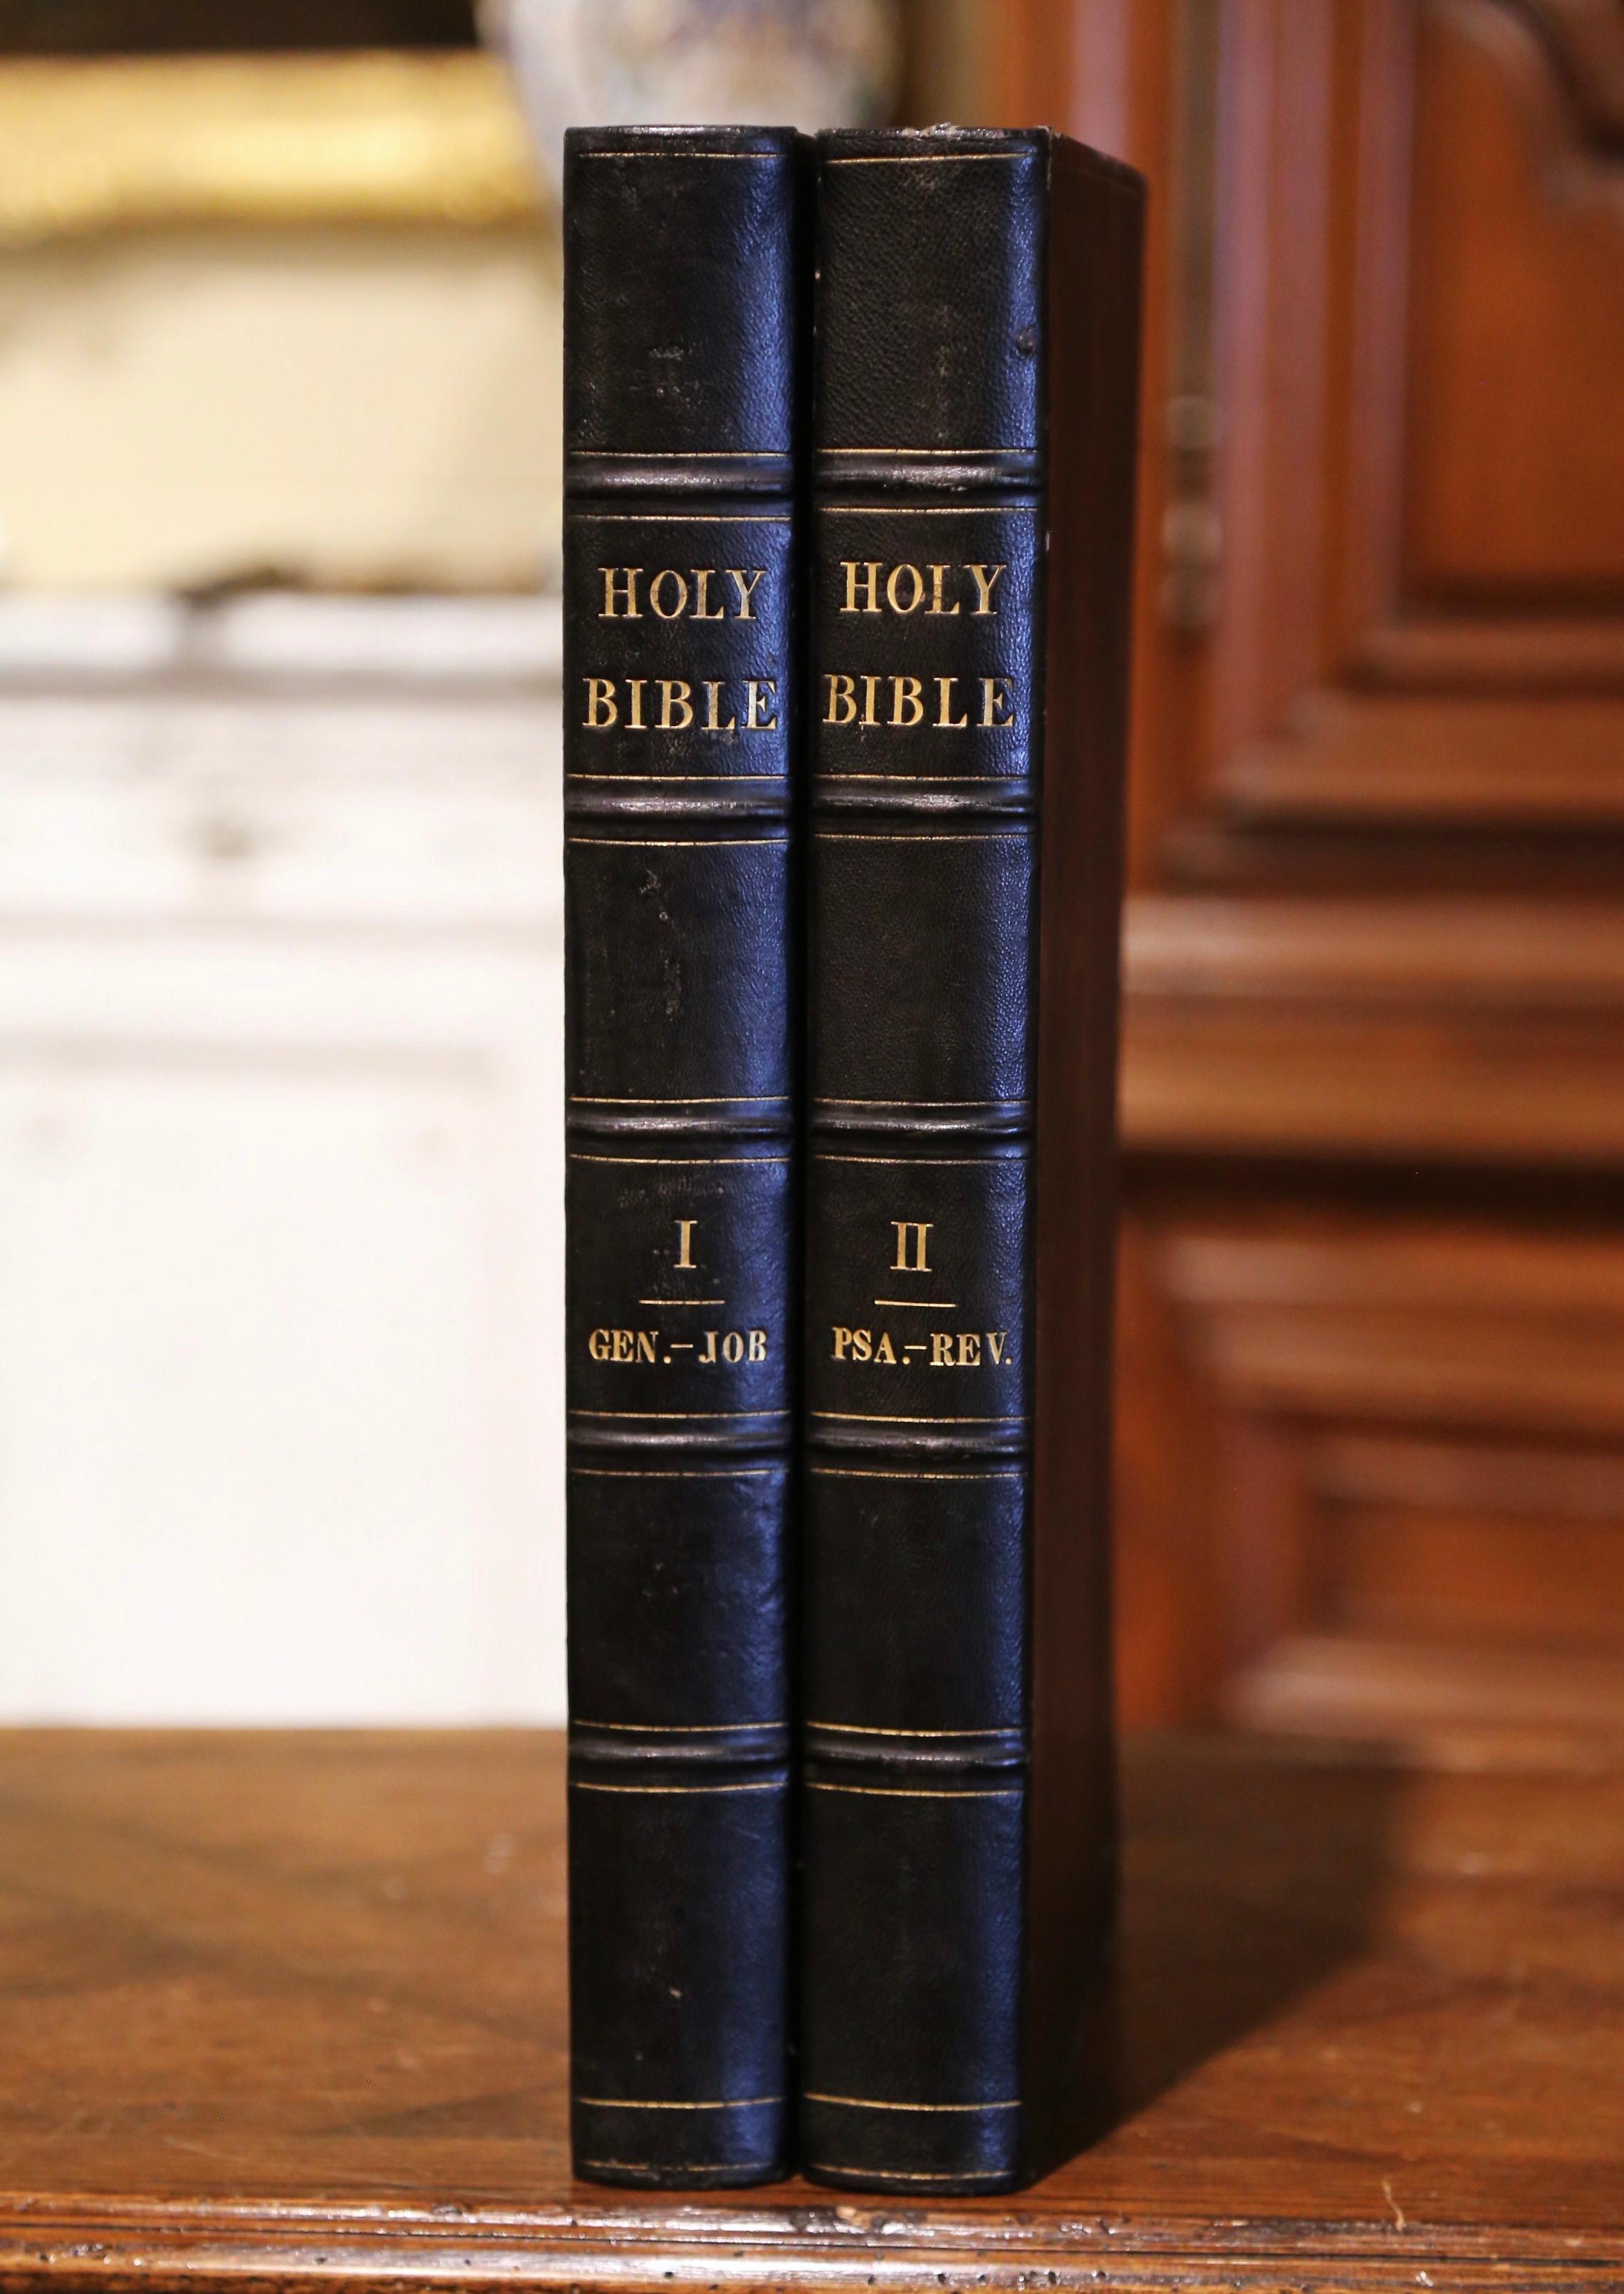 Listen to the word of God with these two-volume antique family Bibles. Published by Joseph Teal and printed in Boston in 1822 each holy book is dressed with black leather and gilt, gold leaf page edges, and colorful inside parchment. Both books are